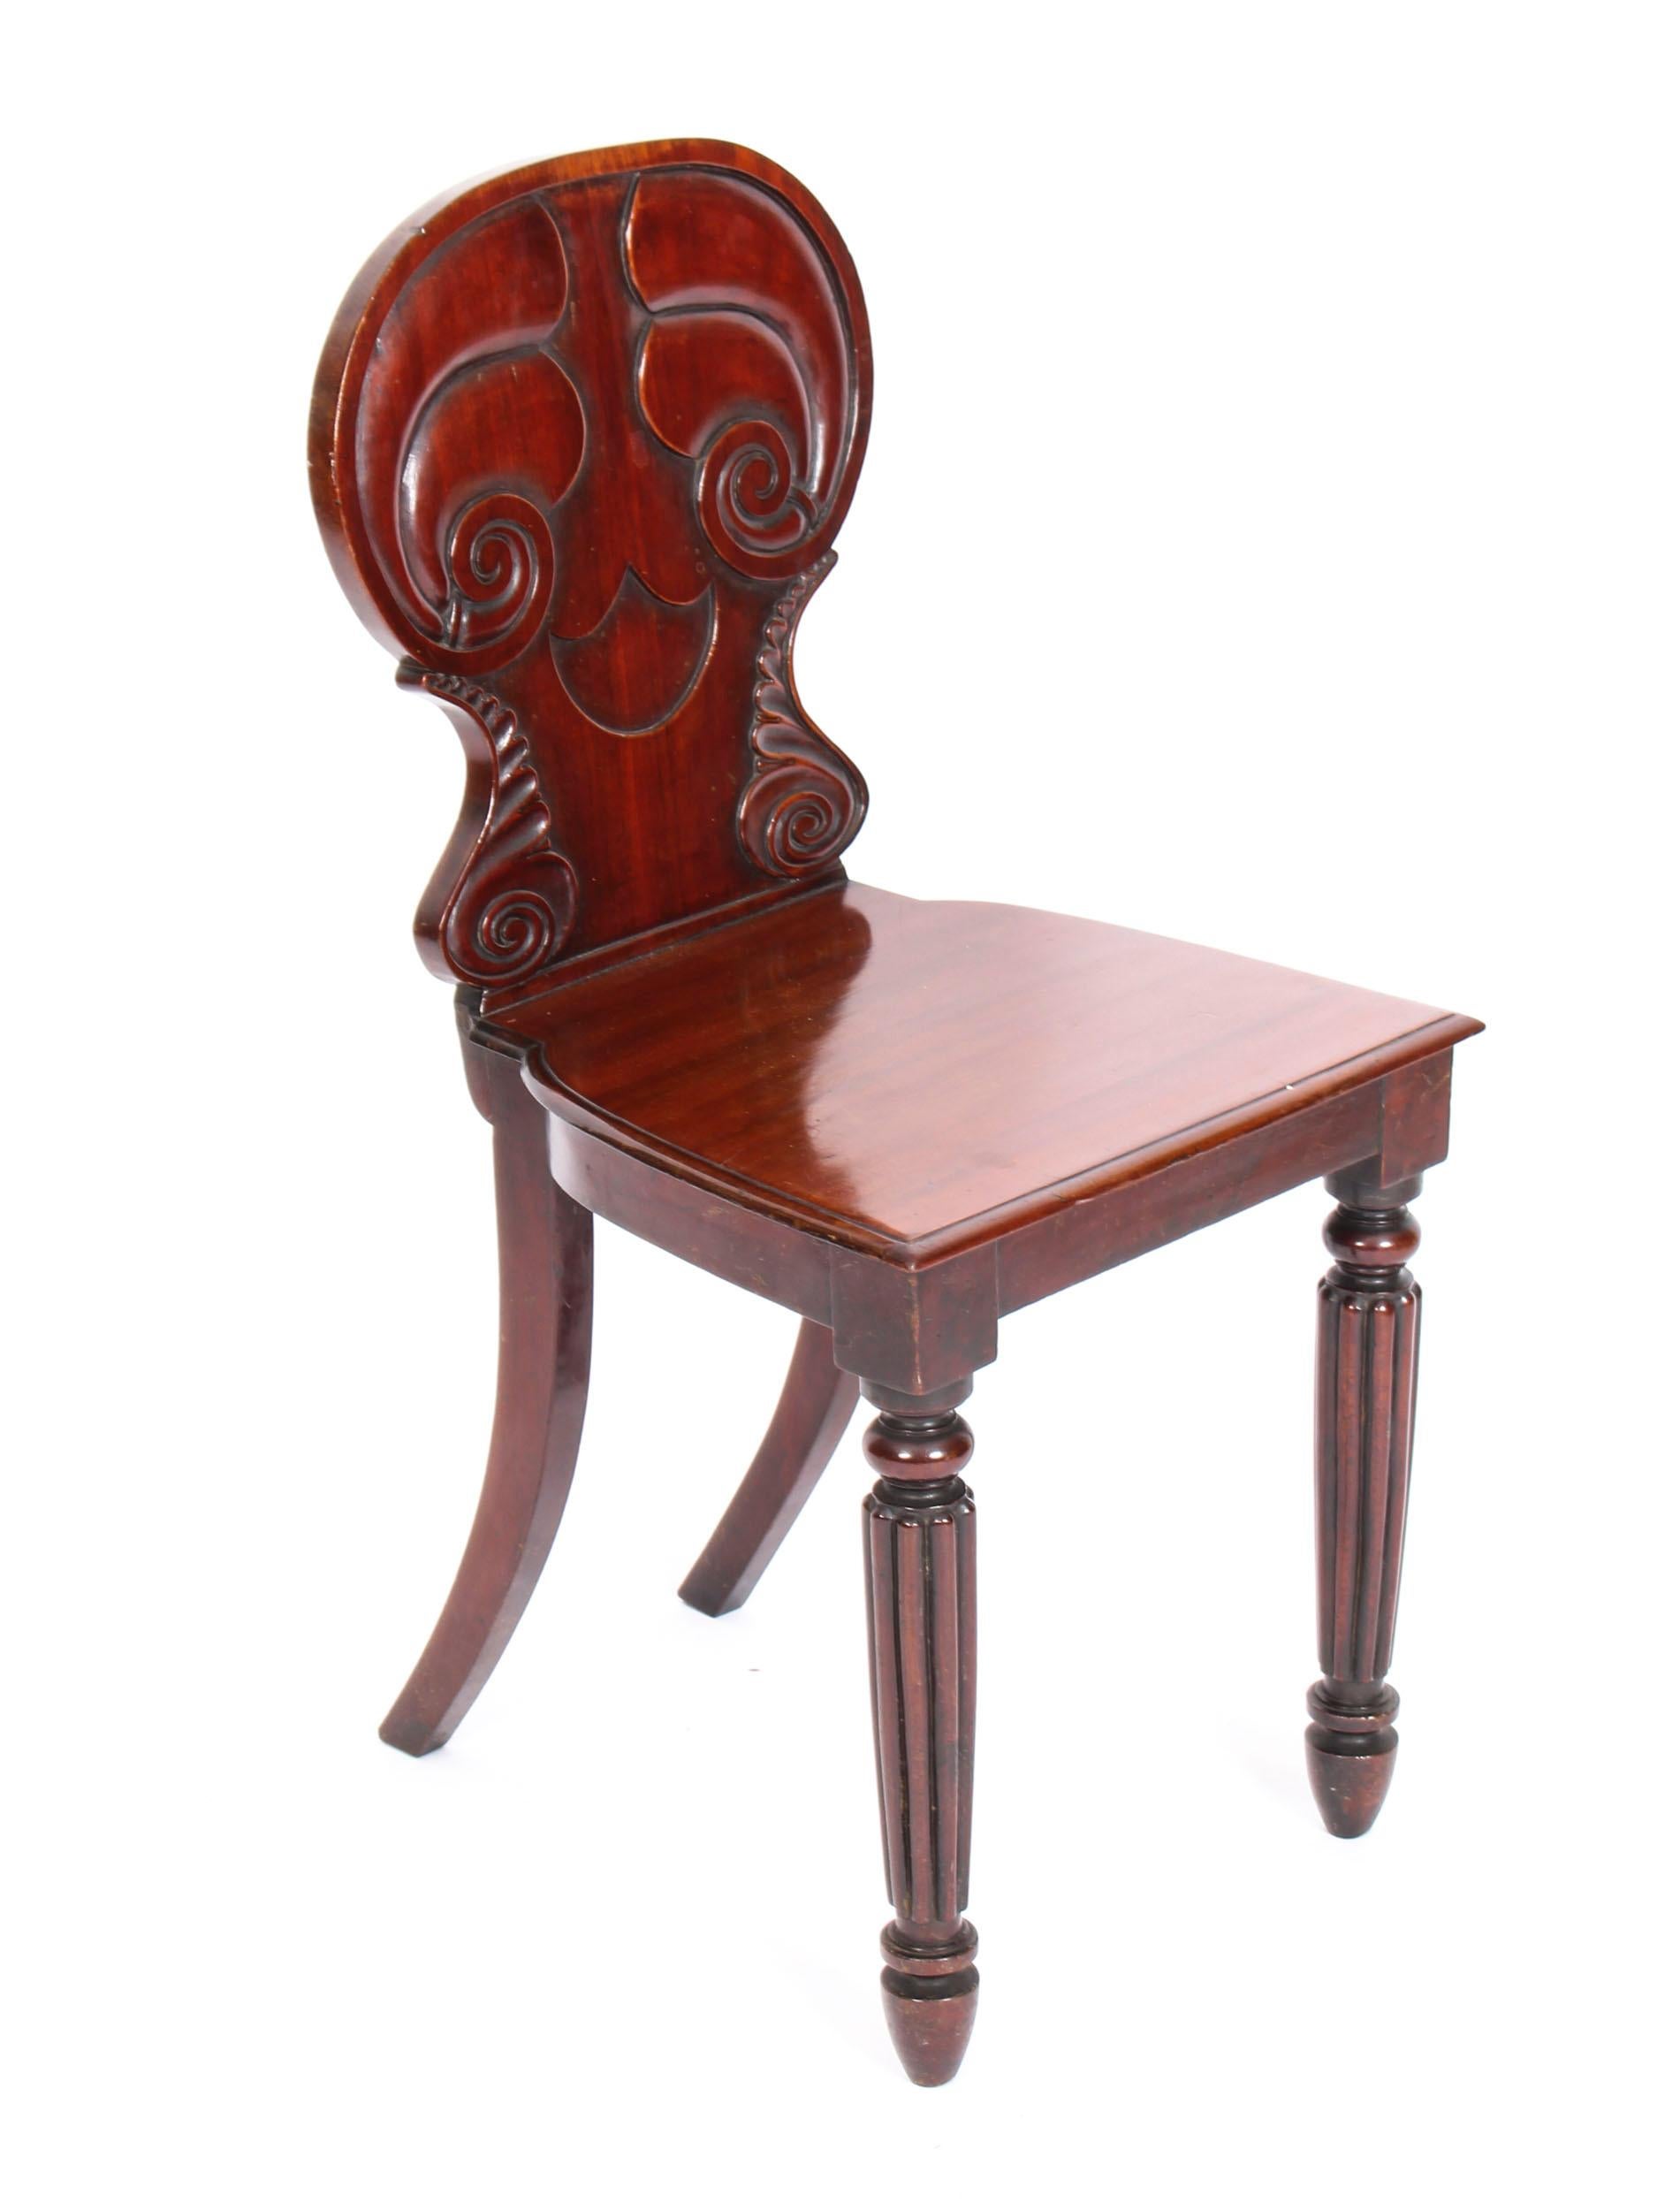 This is a wonderful antique pair of Regency mahogany hall chairs by Gillows Lancaster, circa 1820 in date.
 
These lovely chairs have been masterfully crafted in beautiful solid mahogany.
They feature scroll and foliate carved waisted backs above